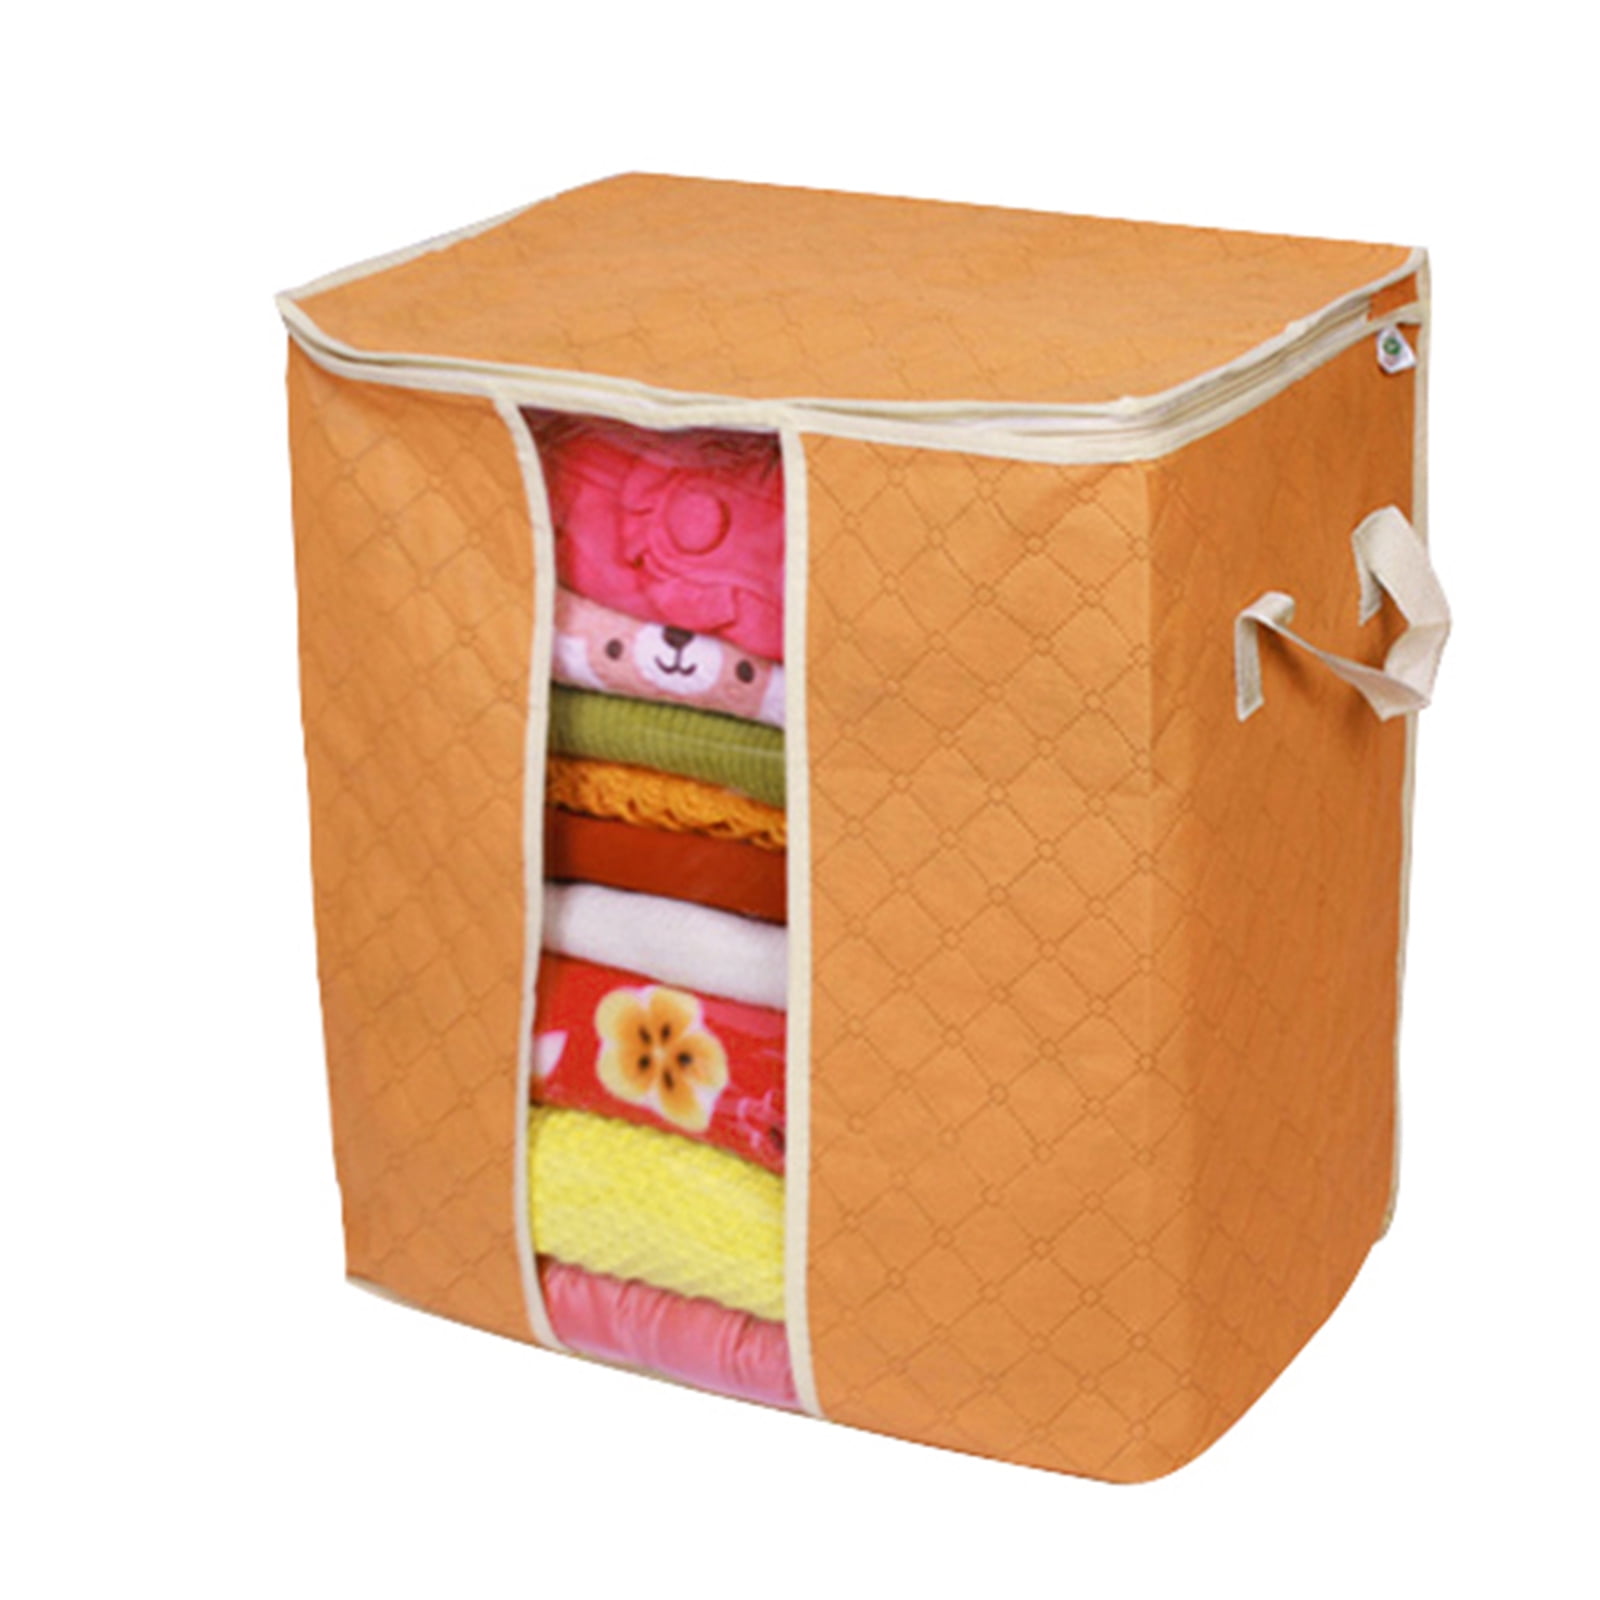 Bedding,Clothes Blankets Thick Fabric for Comforters Storage box with lid Storage Containers Storage Bag Organizer Cubes with Reinforced Handle,Storage Bins with Zipper Foldable with Sturdy Zipper 